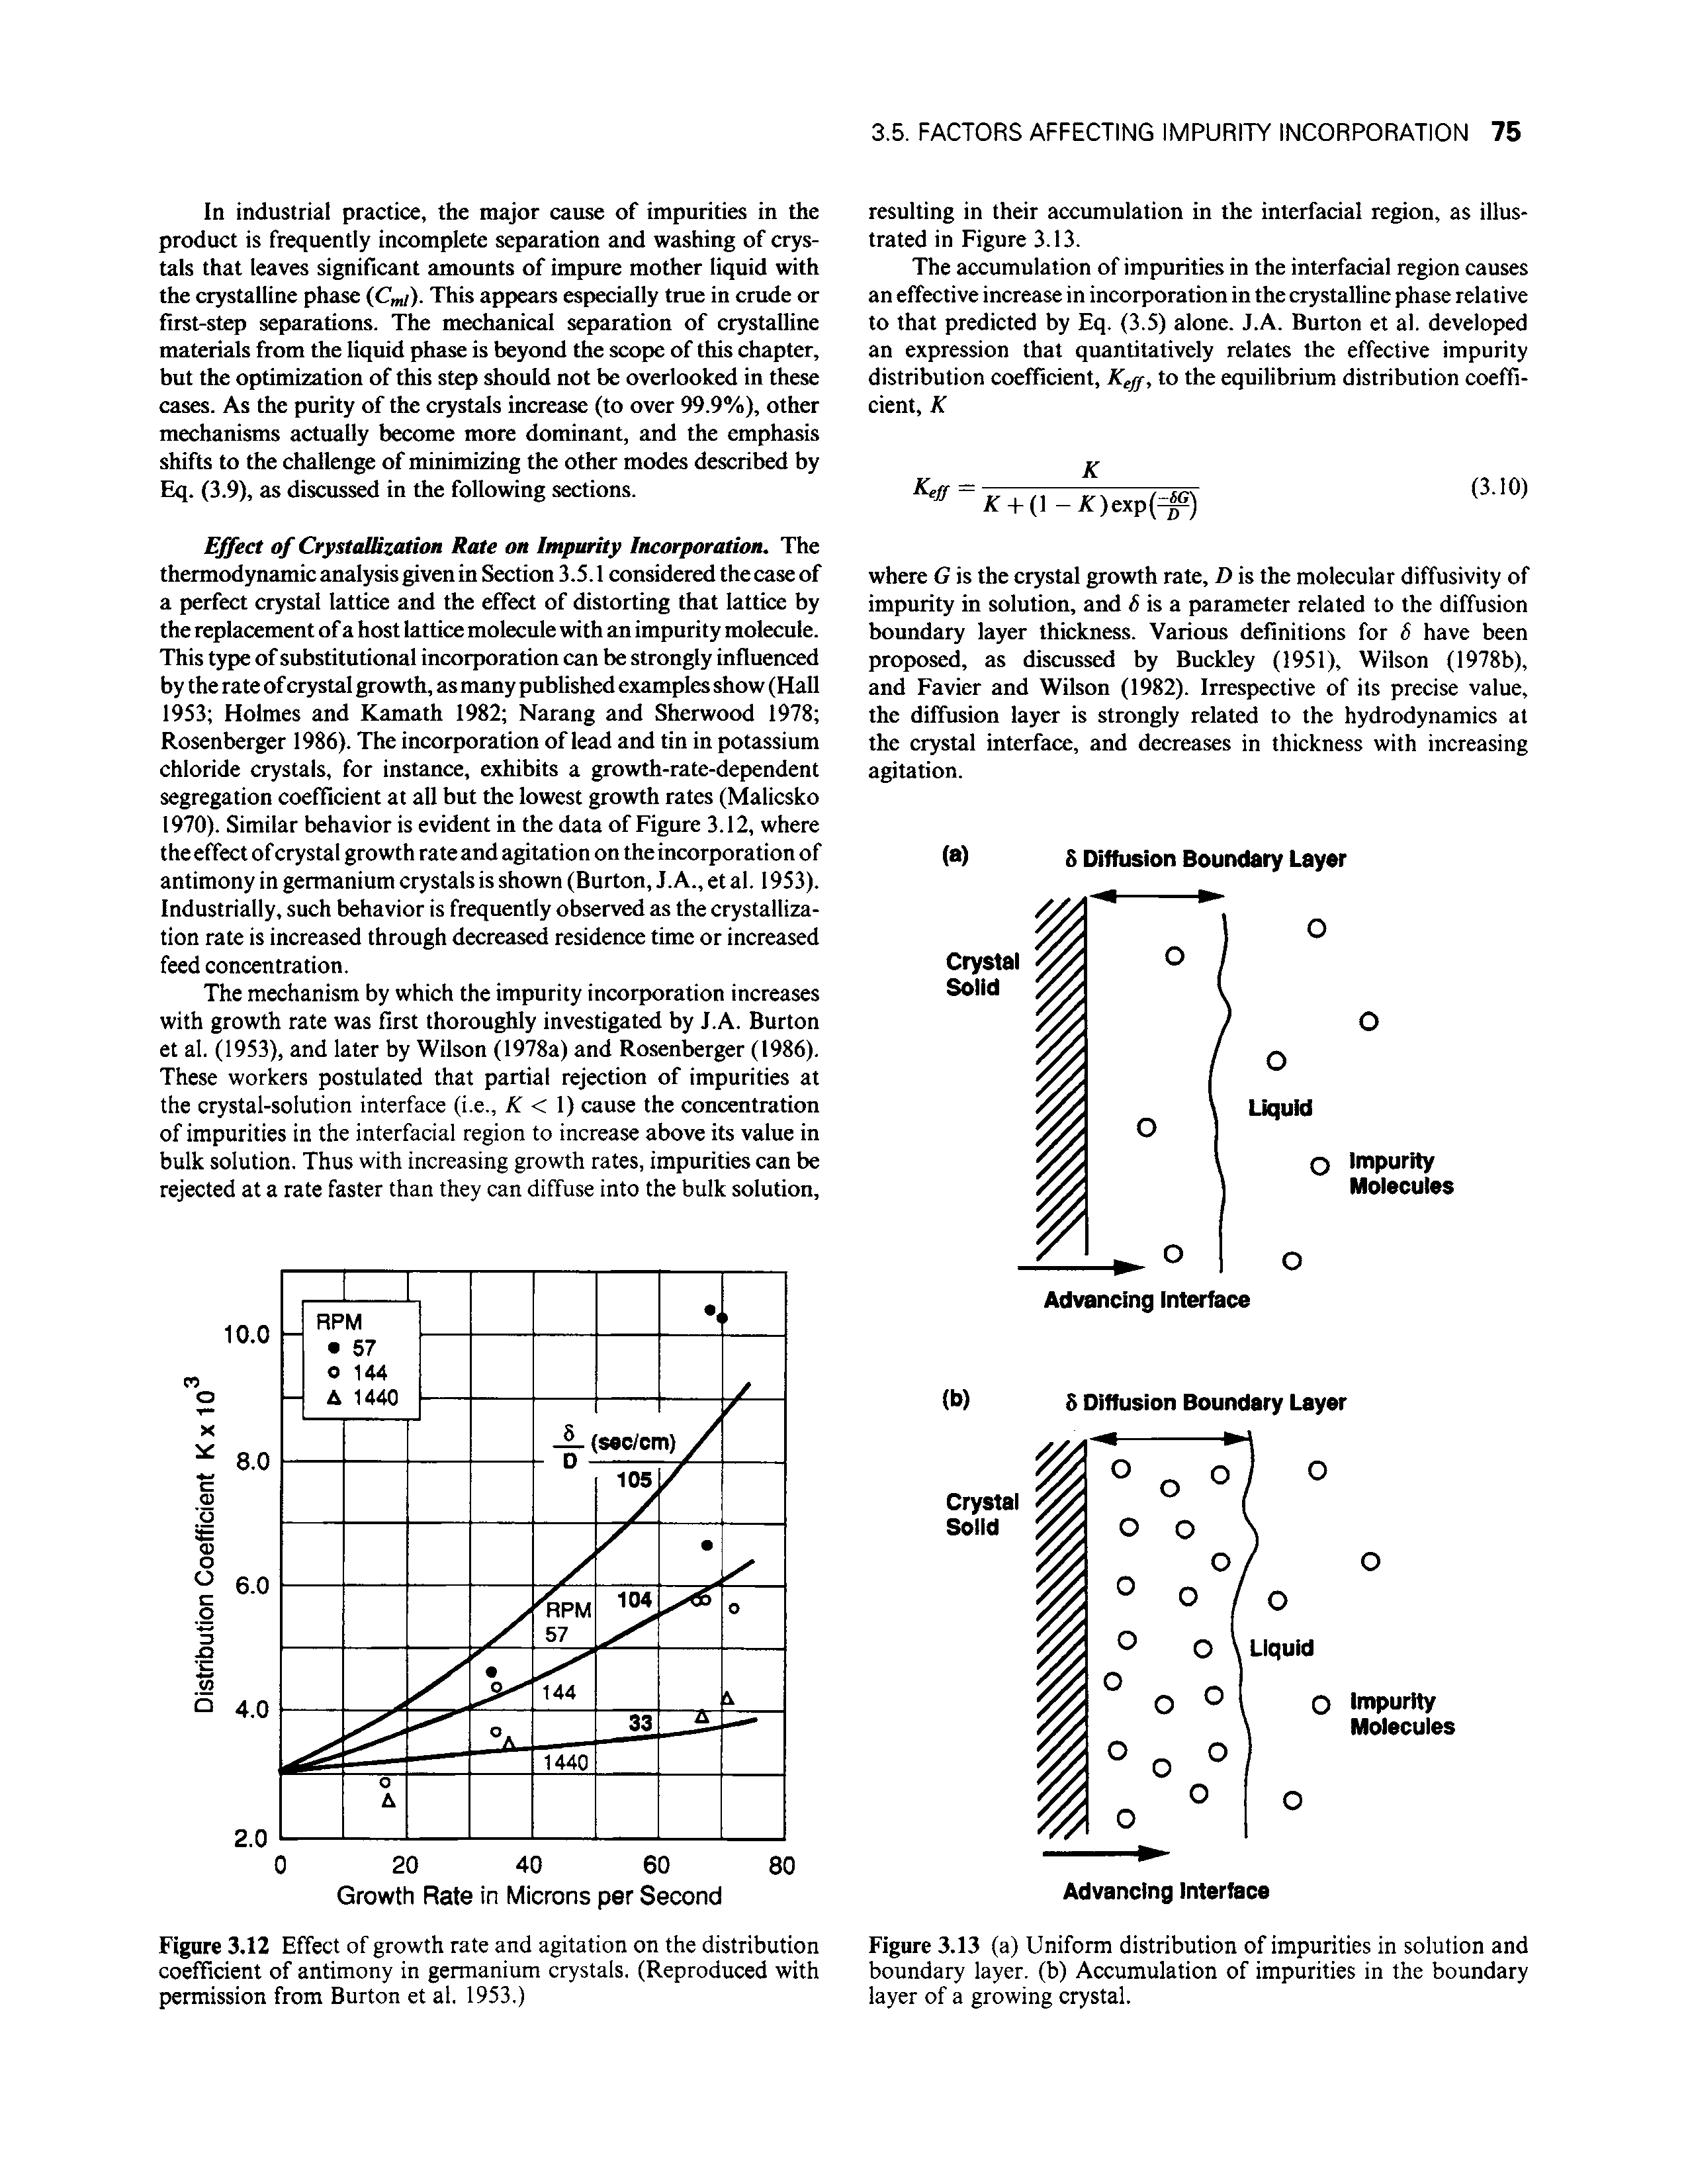 Figure 3.12 Effect of growth rate and agitation on the distribution coefficient of antimony in germanium crystals. (Reproduced with permission from Burton et al. 1953.)...